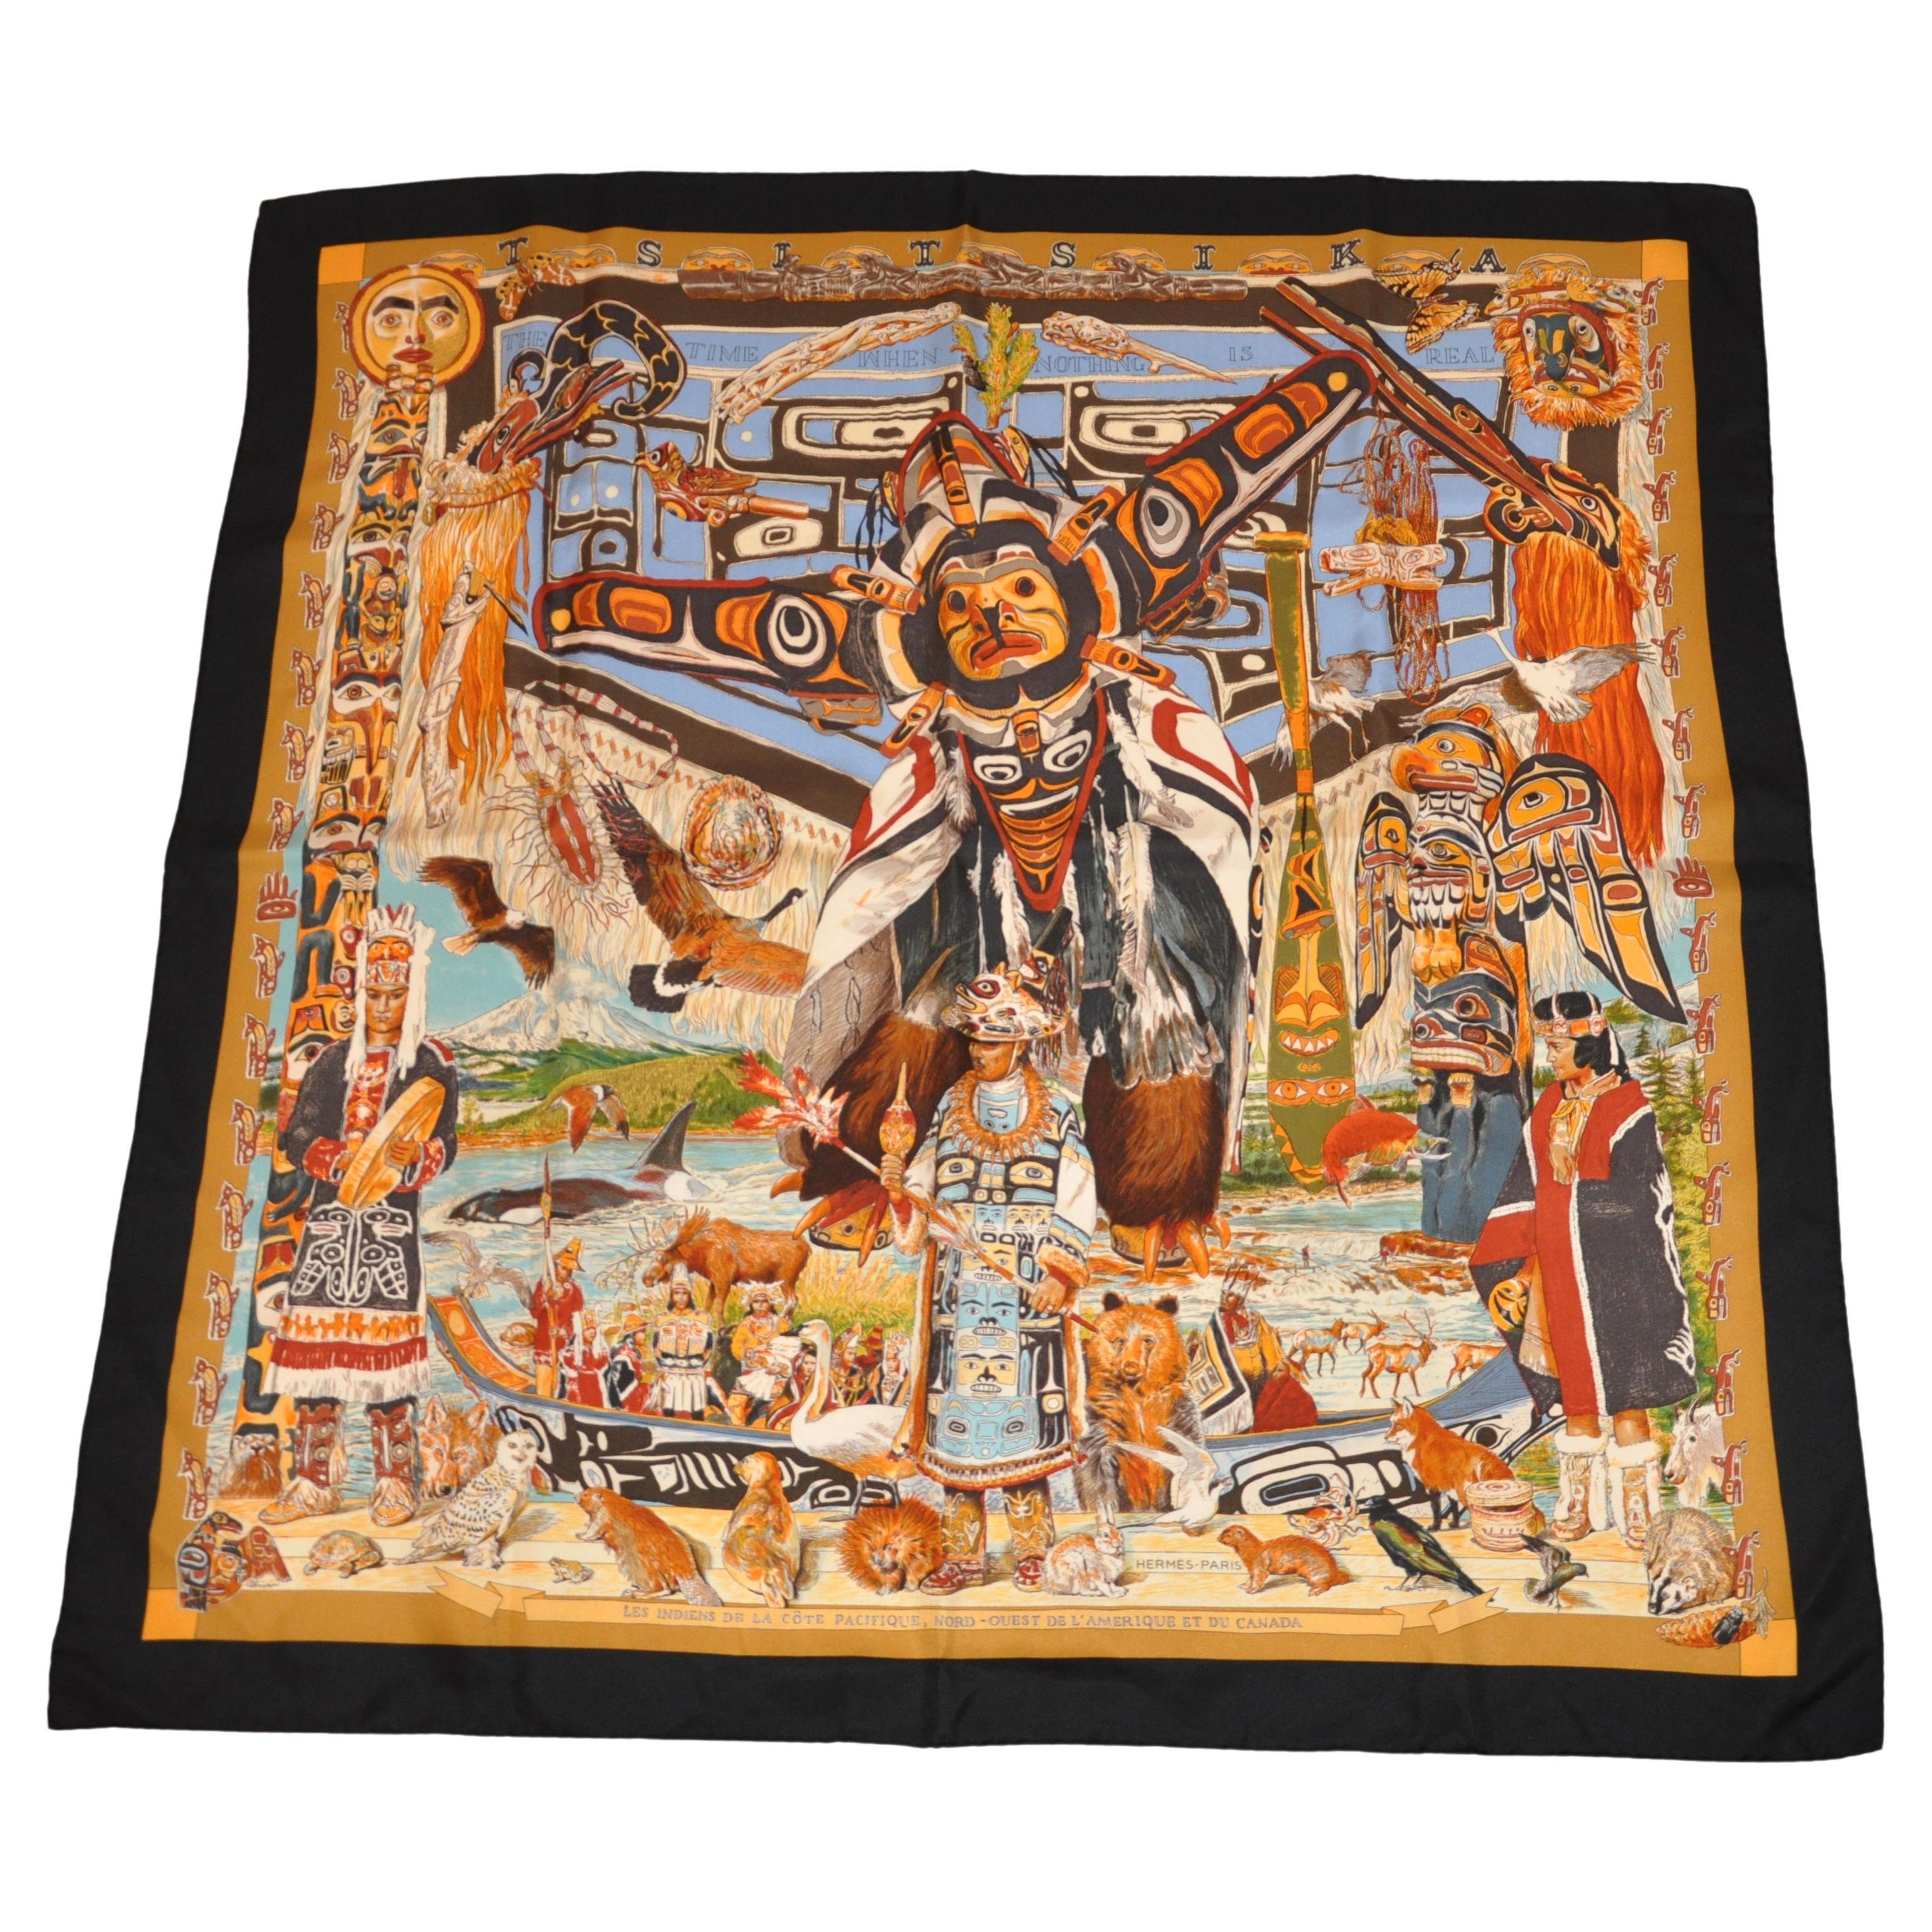 Hermes Magnificently Detailed "Limited Edition" "Tsitsika" Silk Jacquard Scarf